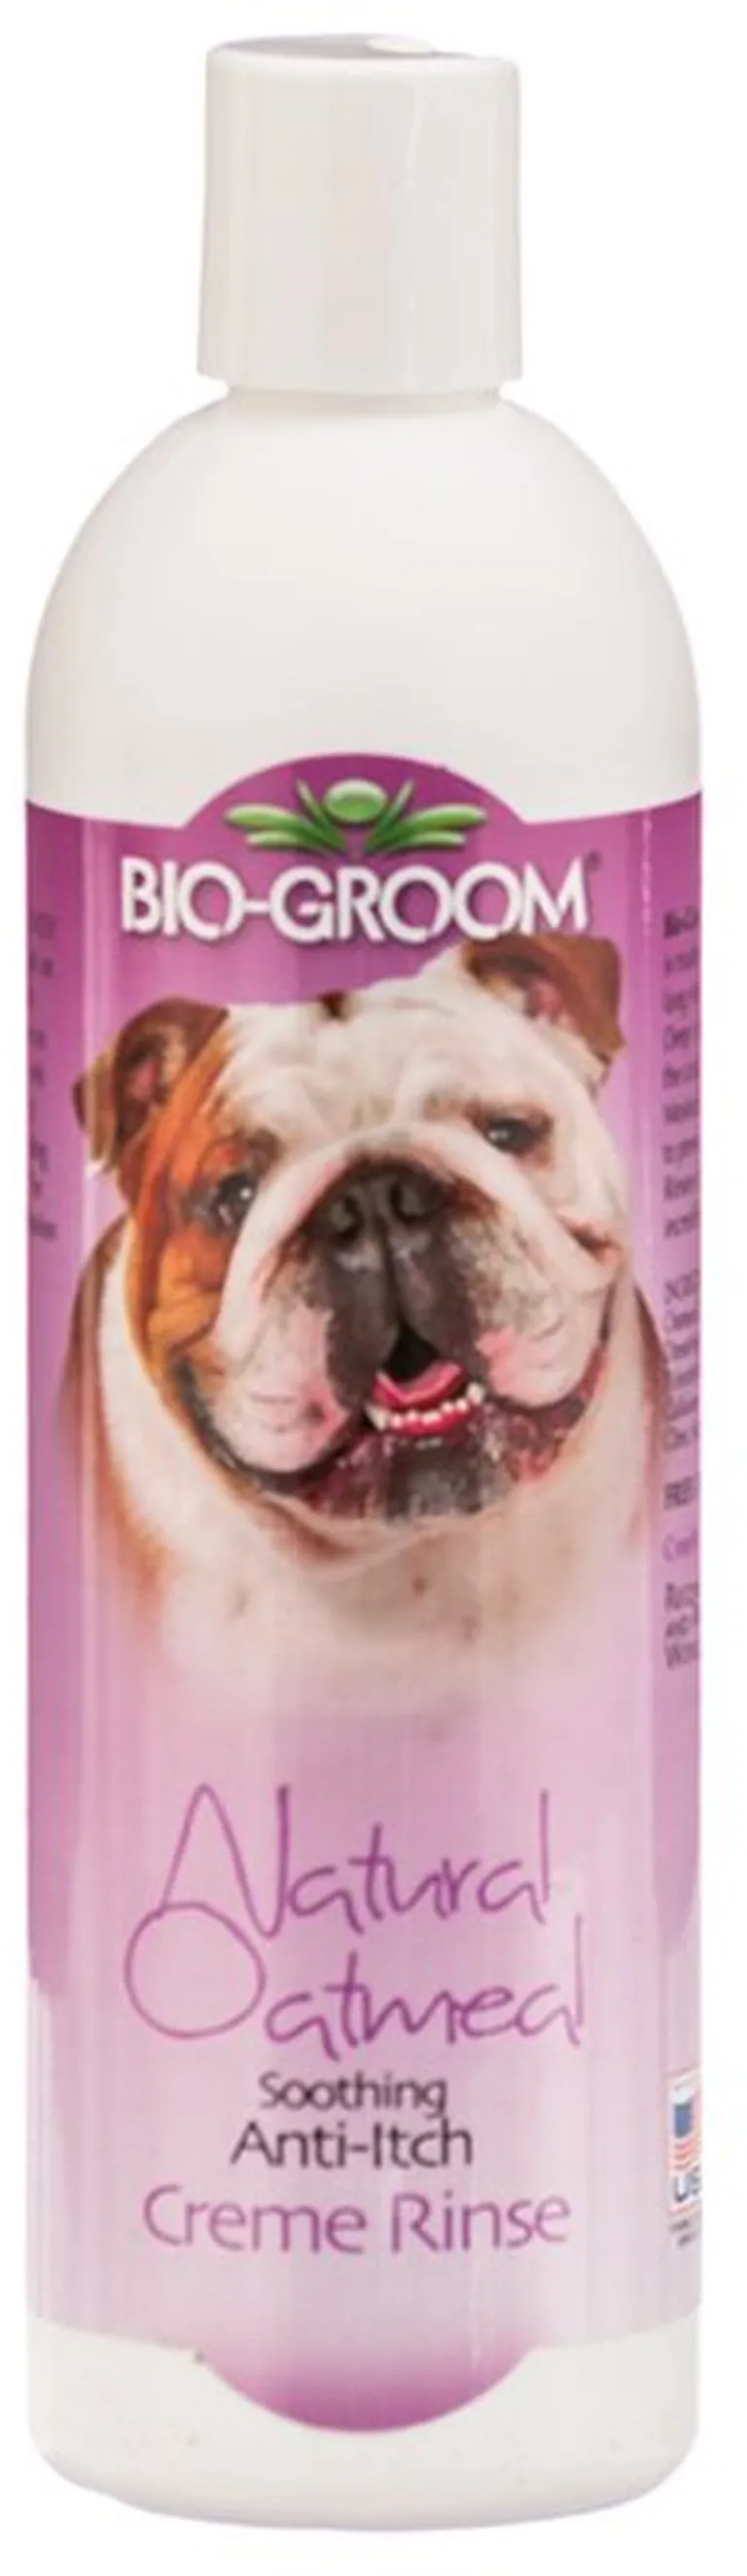 Bio Groom Natural Oatmeal Soothing Anti-Itch Creme Rinse Photo 2